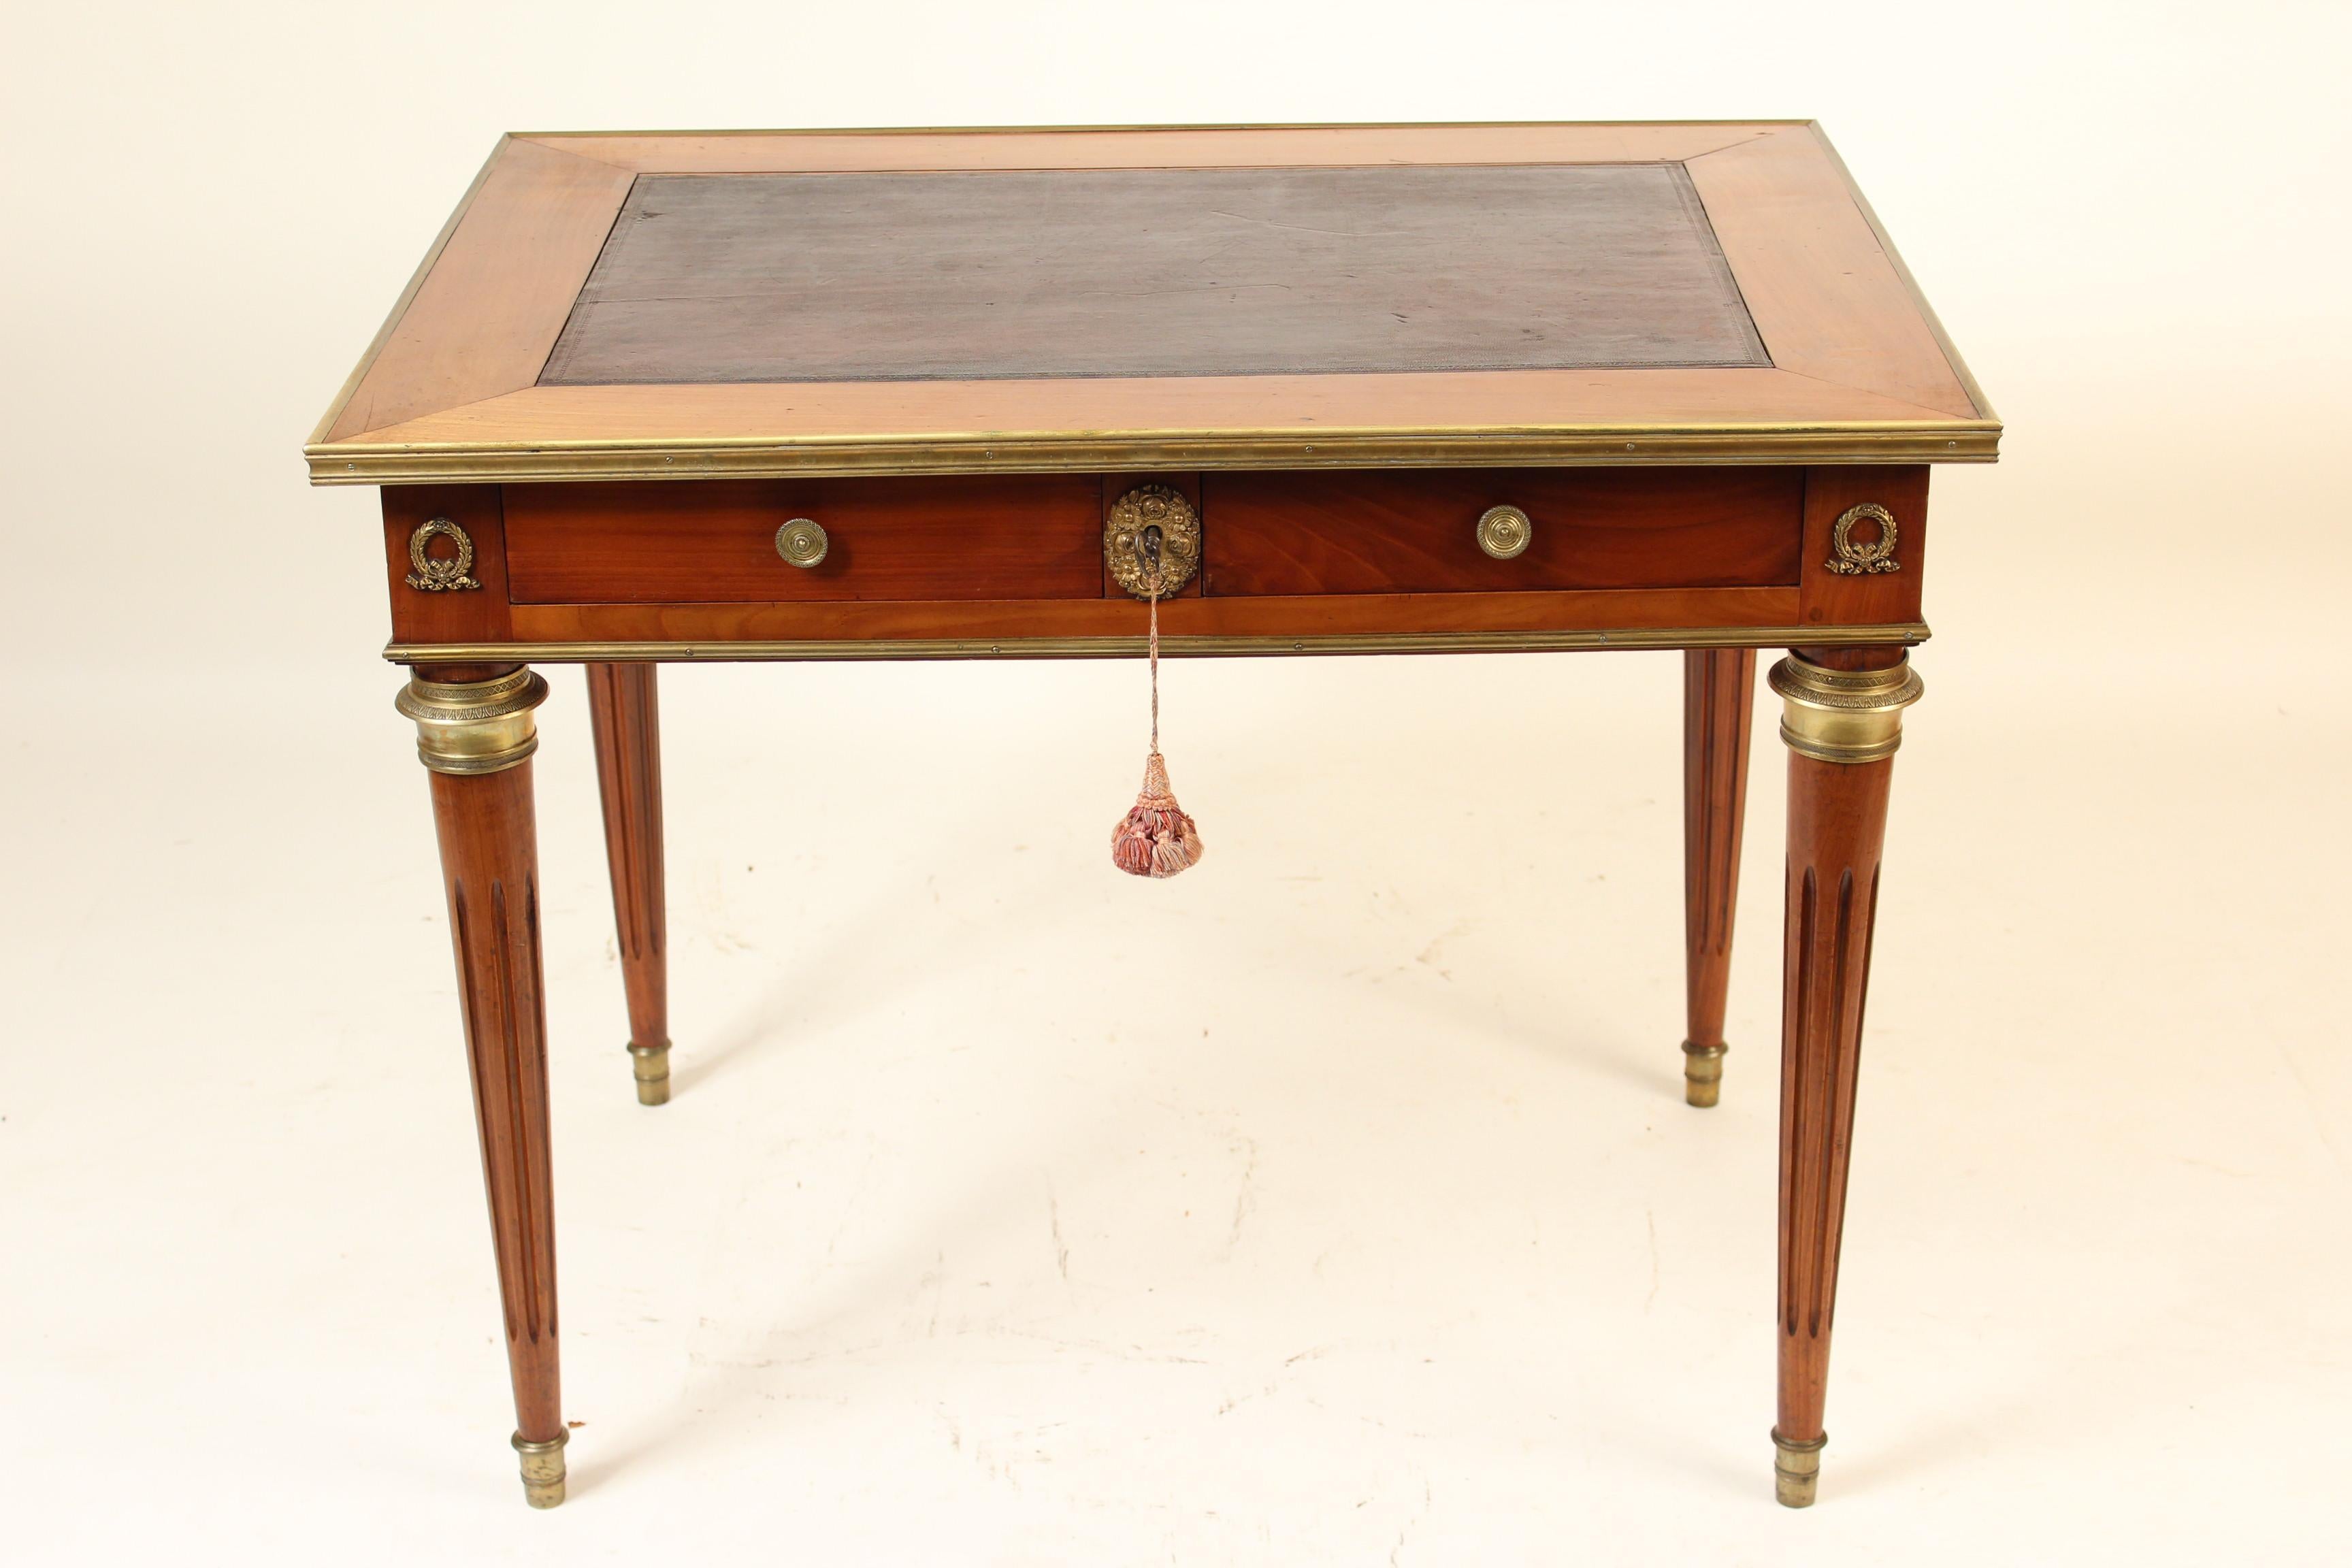 Louis XVI style beechwood partners writing table / desk with bronze mounts and a leather top, circa 1930's. This writing table has excellent quality bronze mounts reflecting it's fine quality craftsmanship. The drawers open on either side of the